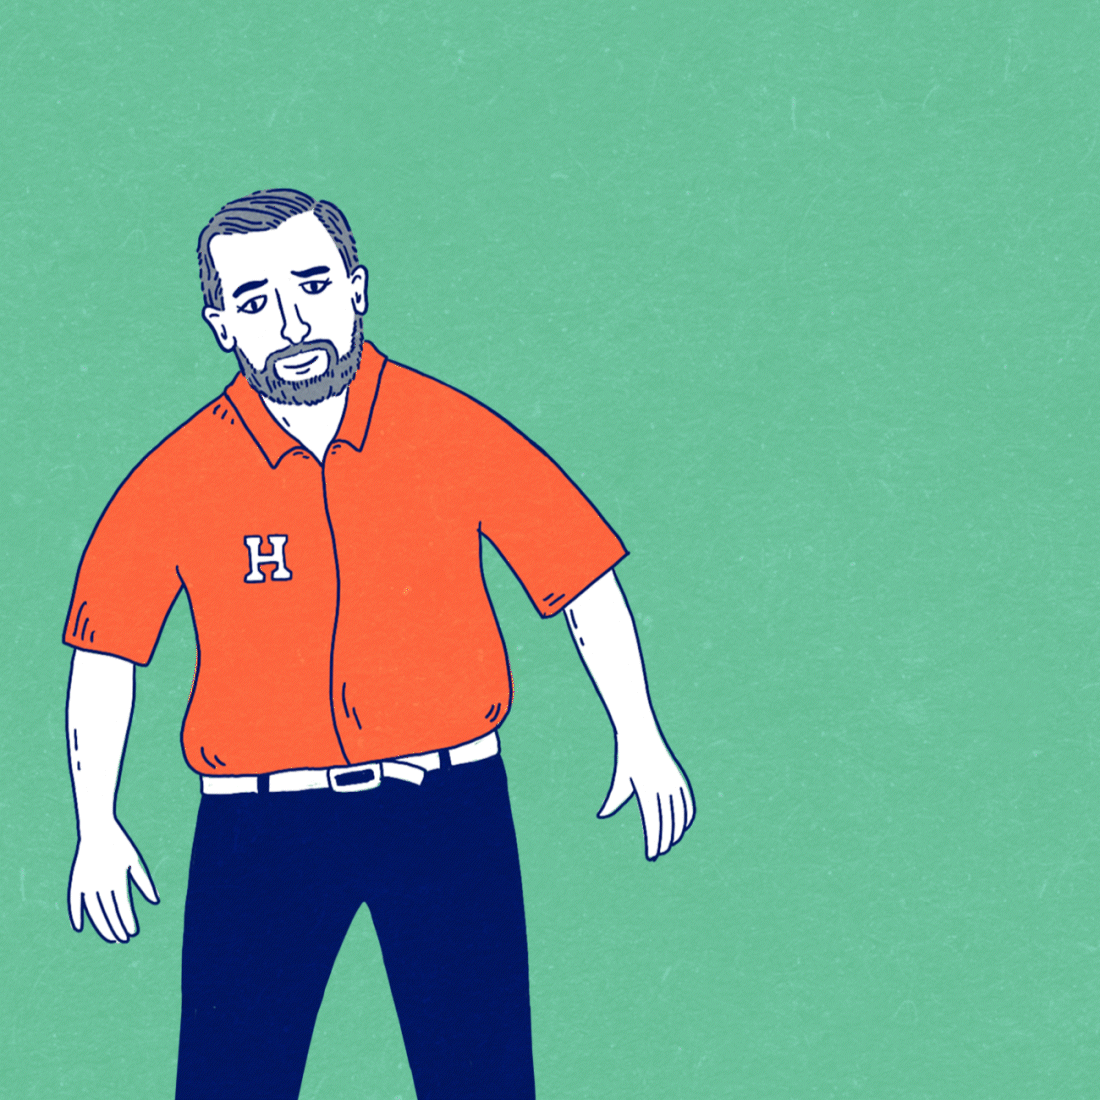 An animated gif of Ted Cruz, wearing an orange polo shirt emblazoned with an H, a white belt, and blue slacks. A can of White Claw alcoholic seltzer comes flying at Cruz from off-screen, striking his shoulder and making him grimace in surprise or pain.